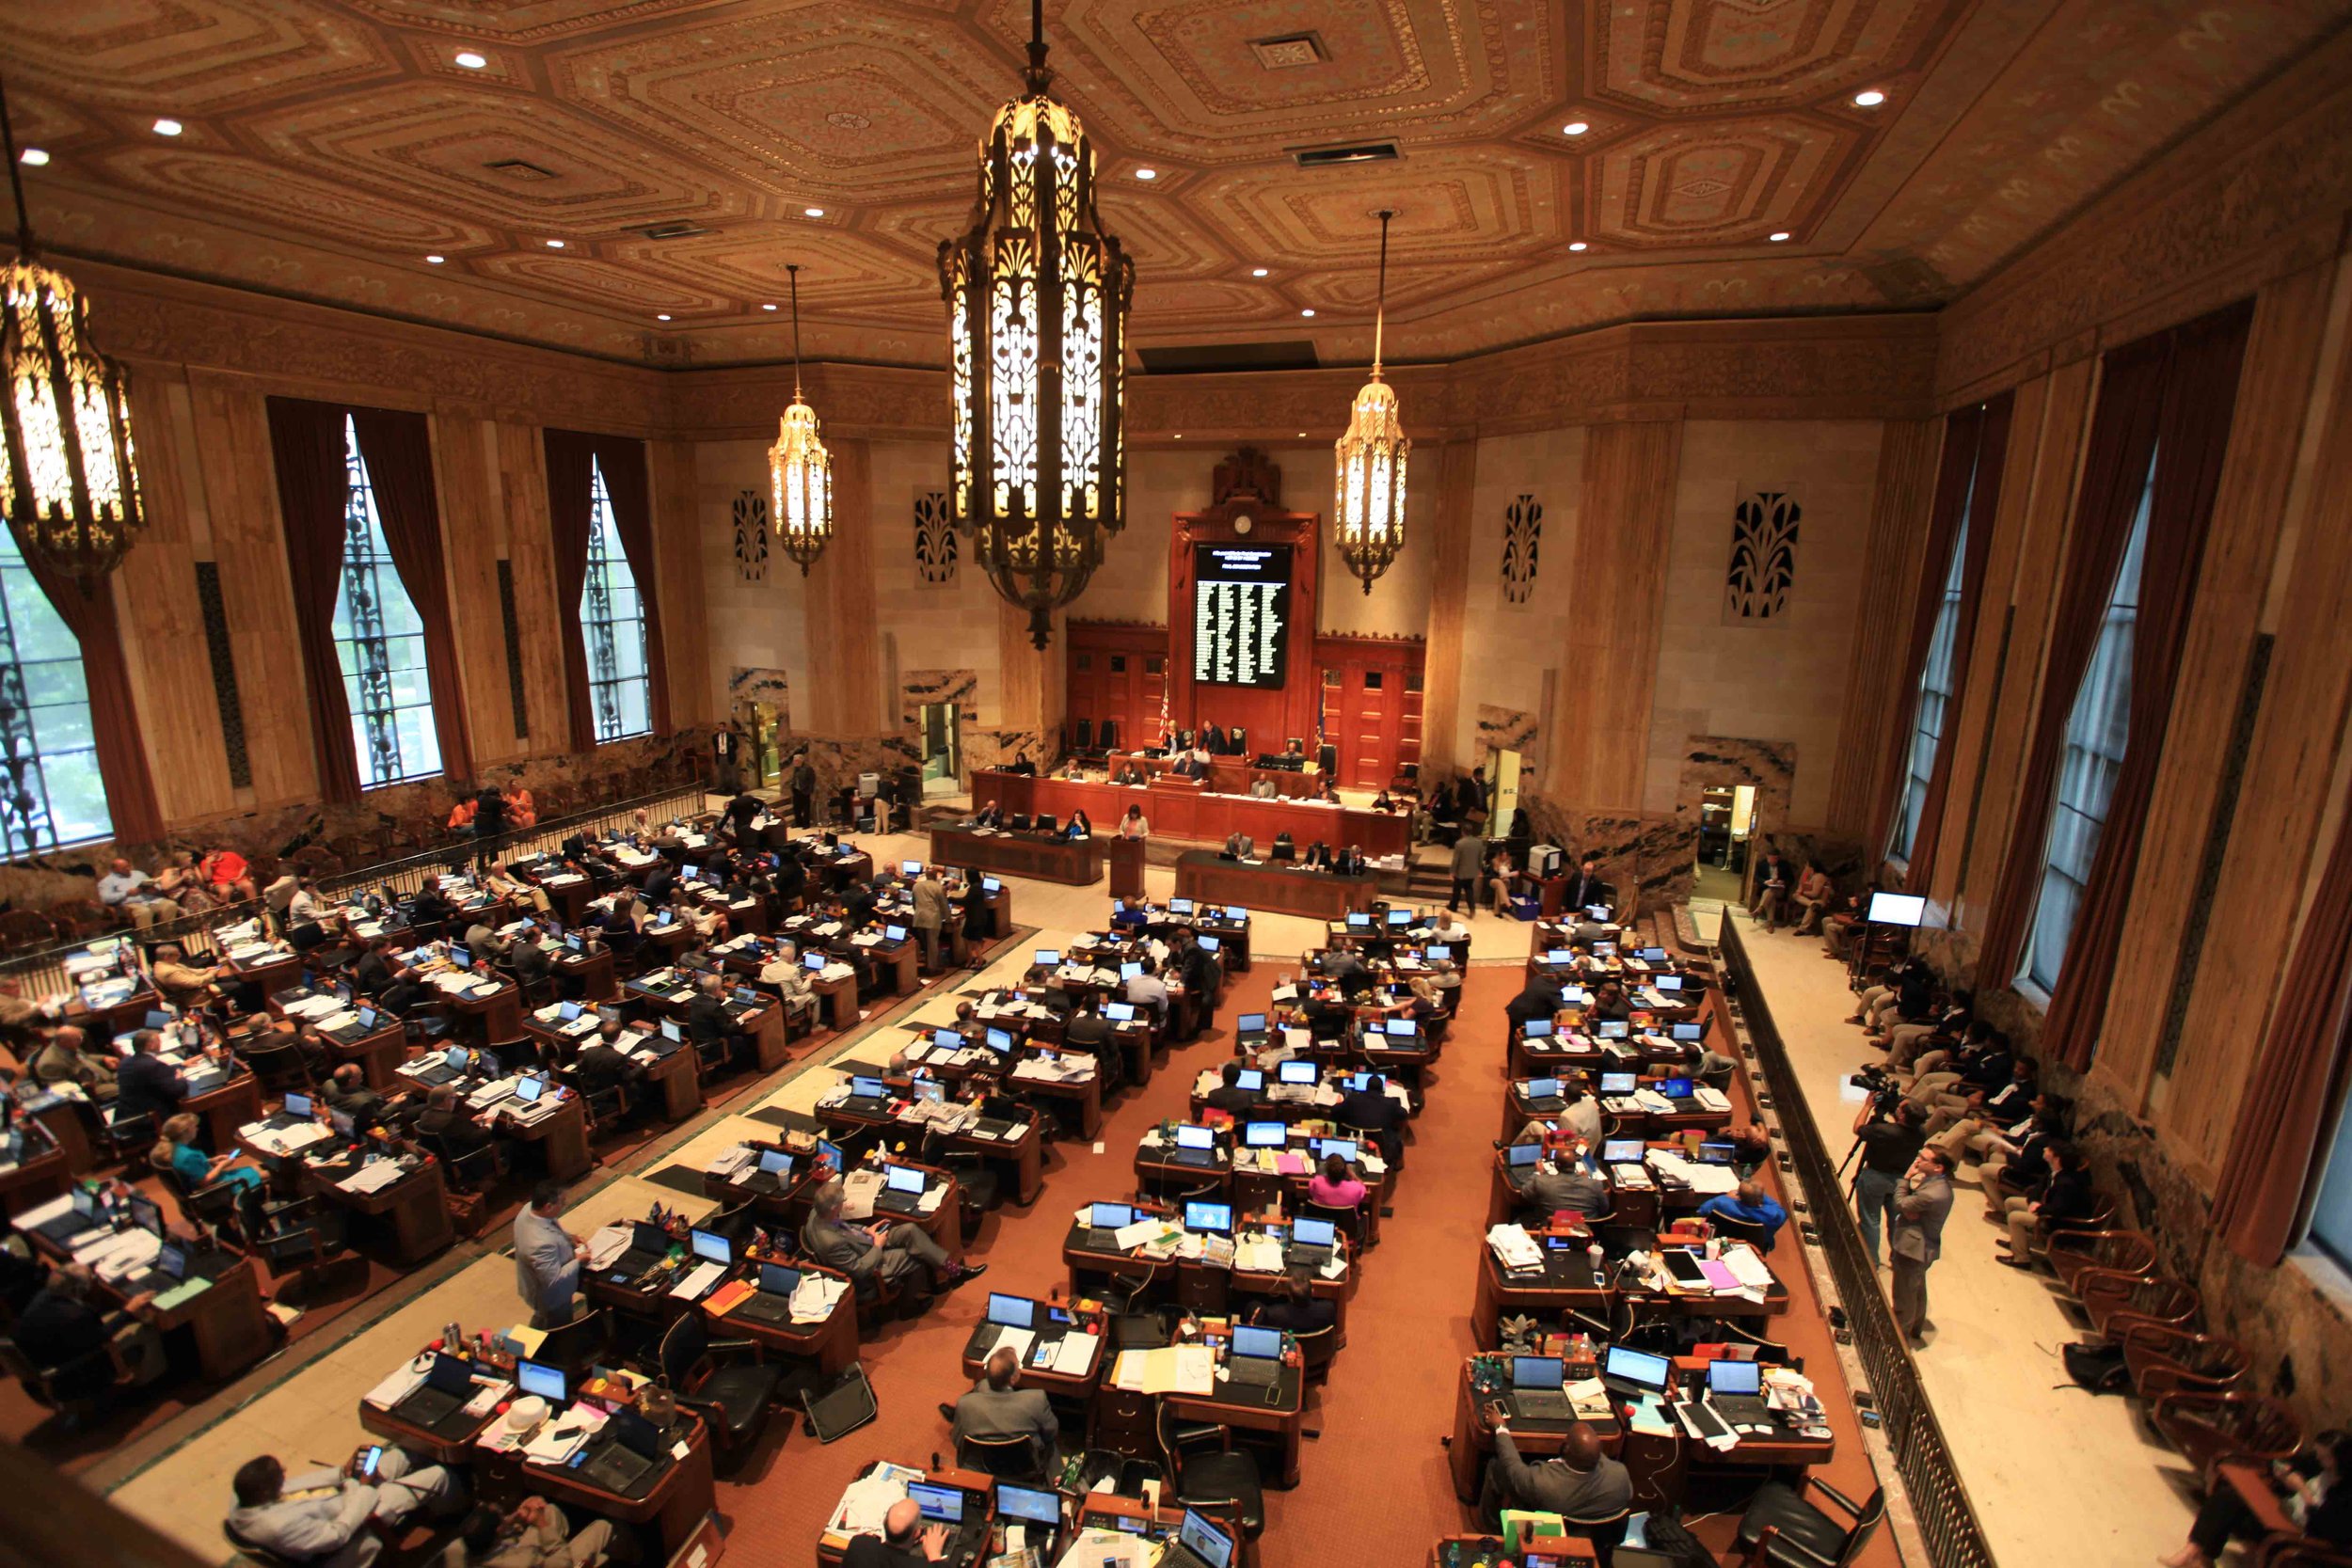  The Louisiana House of Representatives in session.&nbsp; Huey Long would wander onto the floor, sit on the Representatives' desks, and bully them into doing his will. 